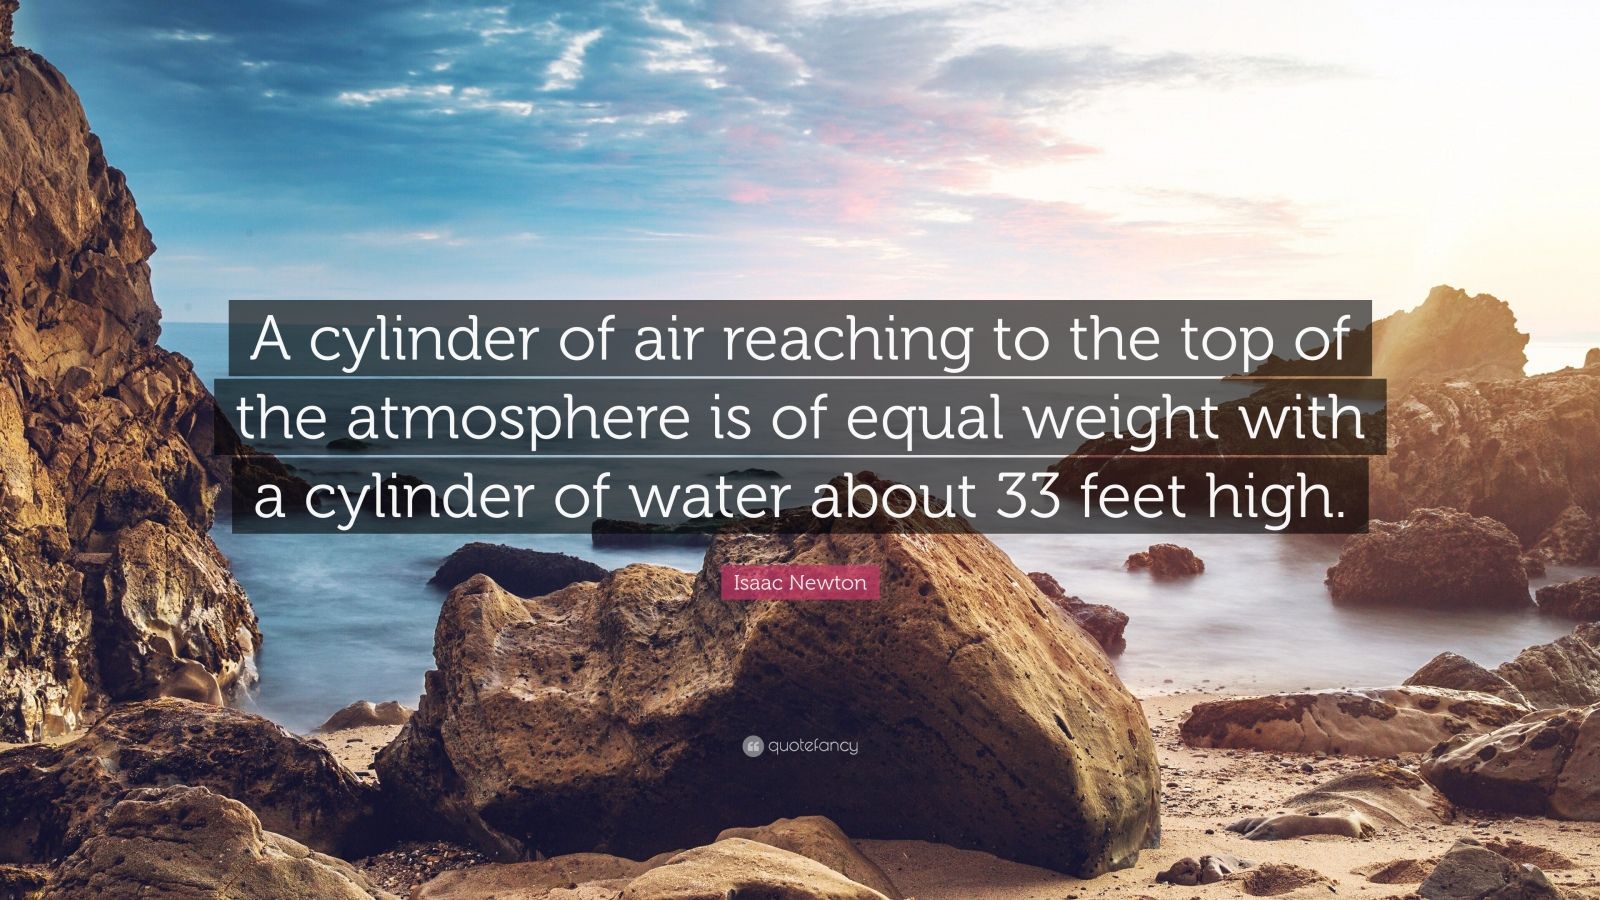 Isaac Newton Quote: "A cylinder of air reaching to the top of the atmosphere is of equal weight ...